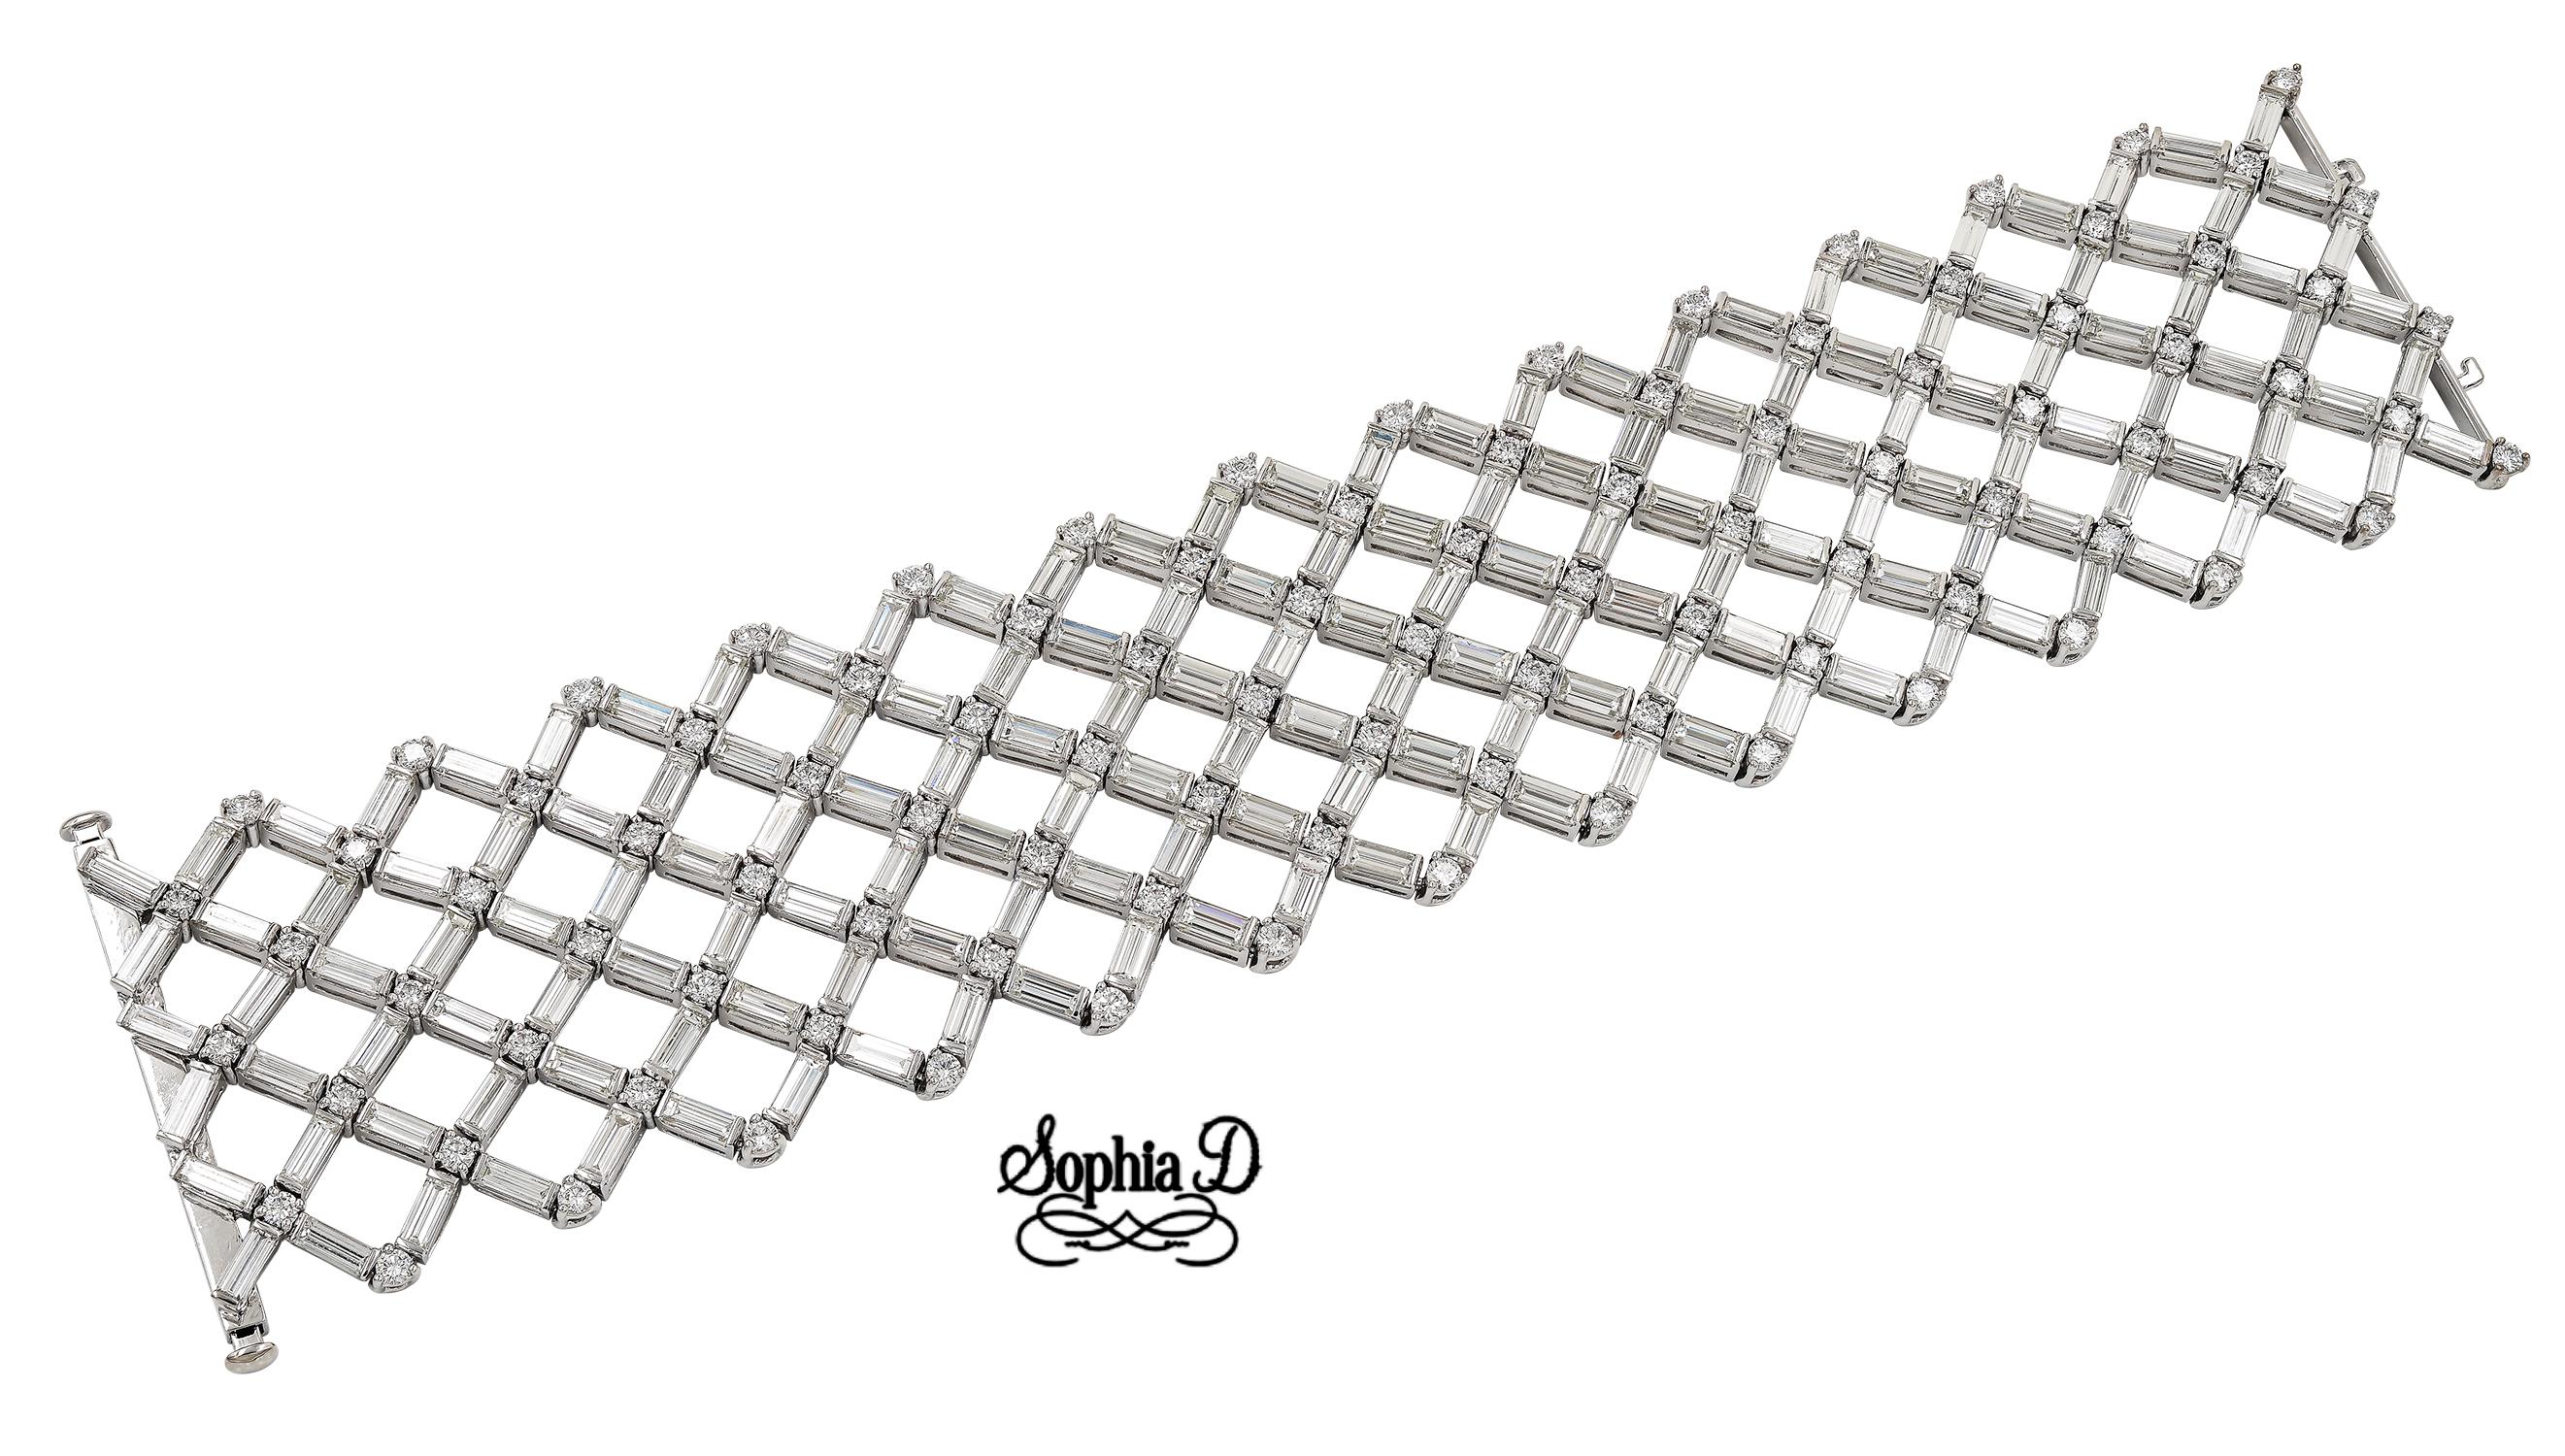 An all diamond bracelet set in platinum created by Sophia D. with 29.01 carat baguette diamond and 4.74 carat round diamond. 

Sophia D by Joseph Dardashti LTD has been known worldwide for 35 years and are inspired by classic Art Deco design that